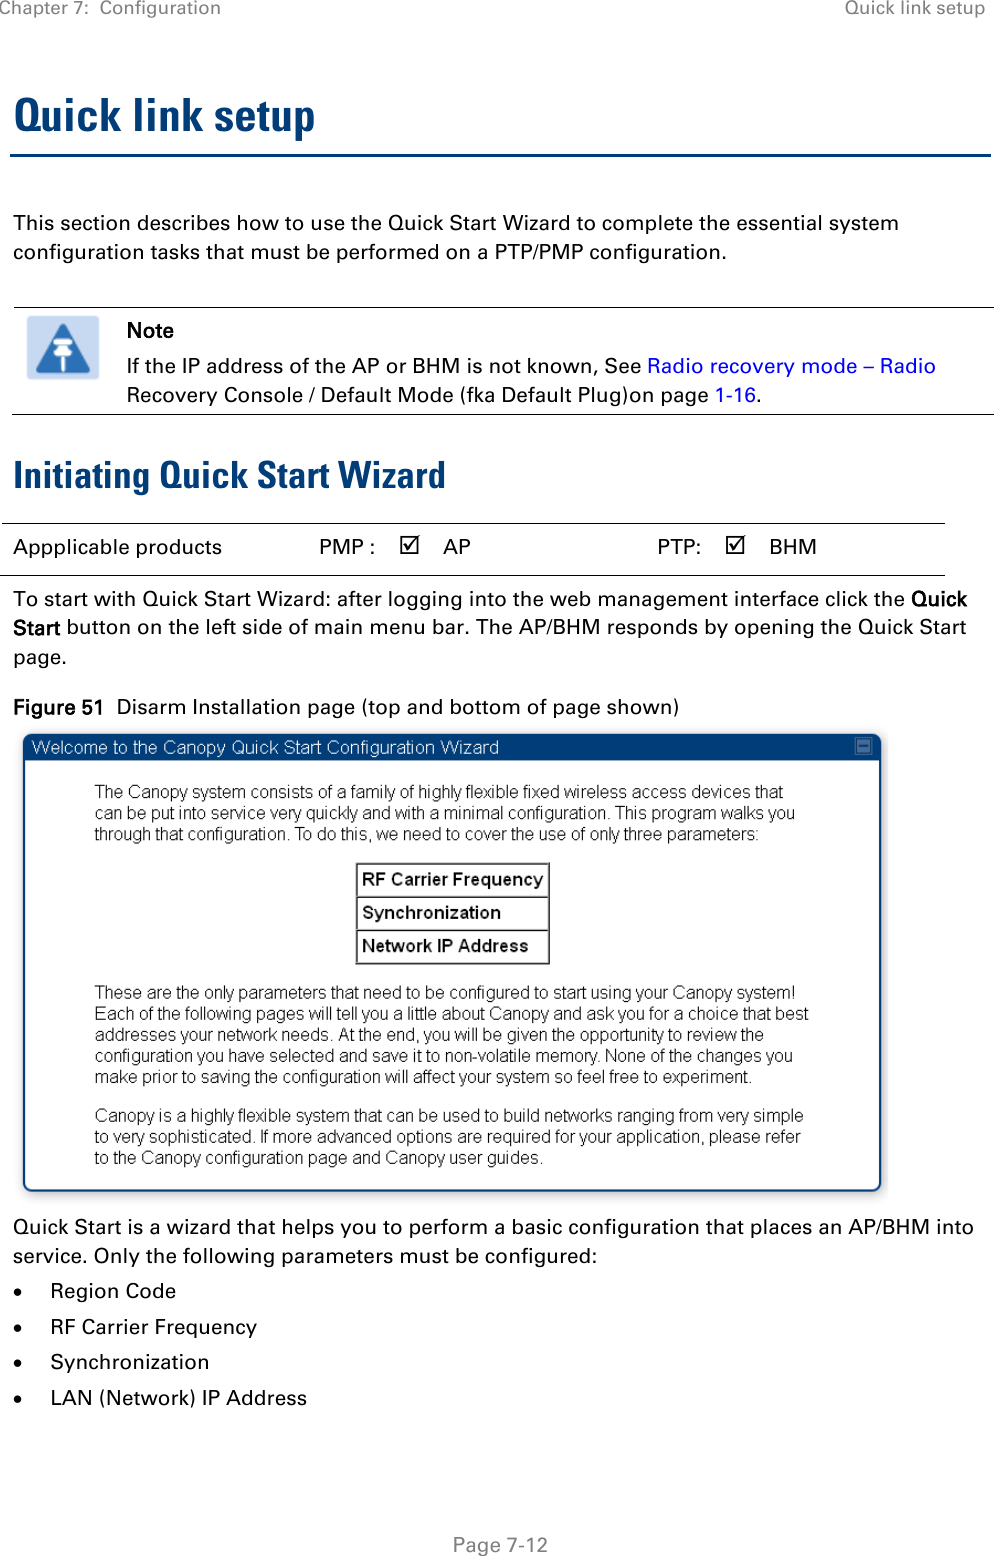 Chapter 7:  Configuration Quick link setup   Page 7-12 Quick link setup This section describes how to use the Quick Start Wizard to complete the essential system configuration tasks that must be performed on a PTP/PMP configuration.   Note If the IP address of the AP or BHM is not known, See Radio recovery mode – Radio Recovery Console / Default Mode (fka Default Plug)on page 1-16. Initiating Quick Start Wizard Appplicable products PMP :  AP   PTP:  BHM   To start with Quick Start Wizard: after logging into the web management interface click the Quick Start button on the left side of main menu bar. The AP/BHM responds by opening the Quick Start page. Figure 51  Disarm Installation page (top and bottom of page shown)  Quick Start is a wizard that helps you to perform a basic configuration that places an AP/BHM into service. Only the following parameters must be configured: • Region Code • RF Carrier Frequency • Synchronization • LAN (Network) IP Address 